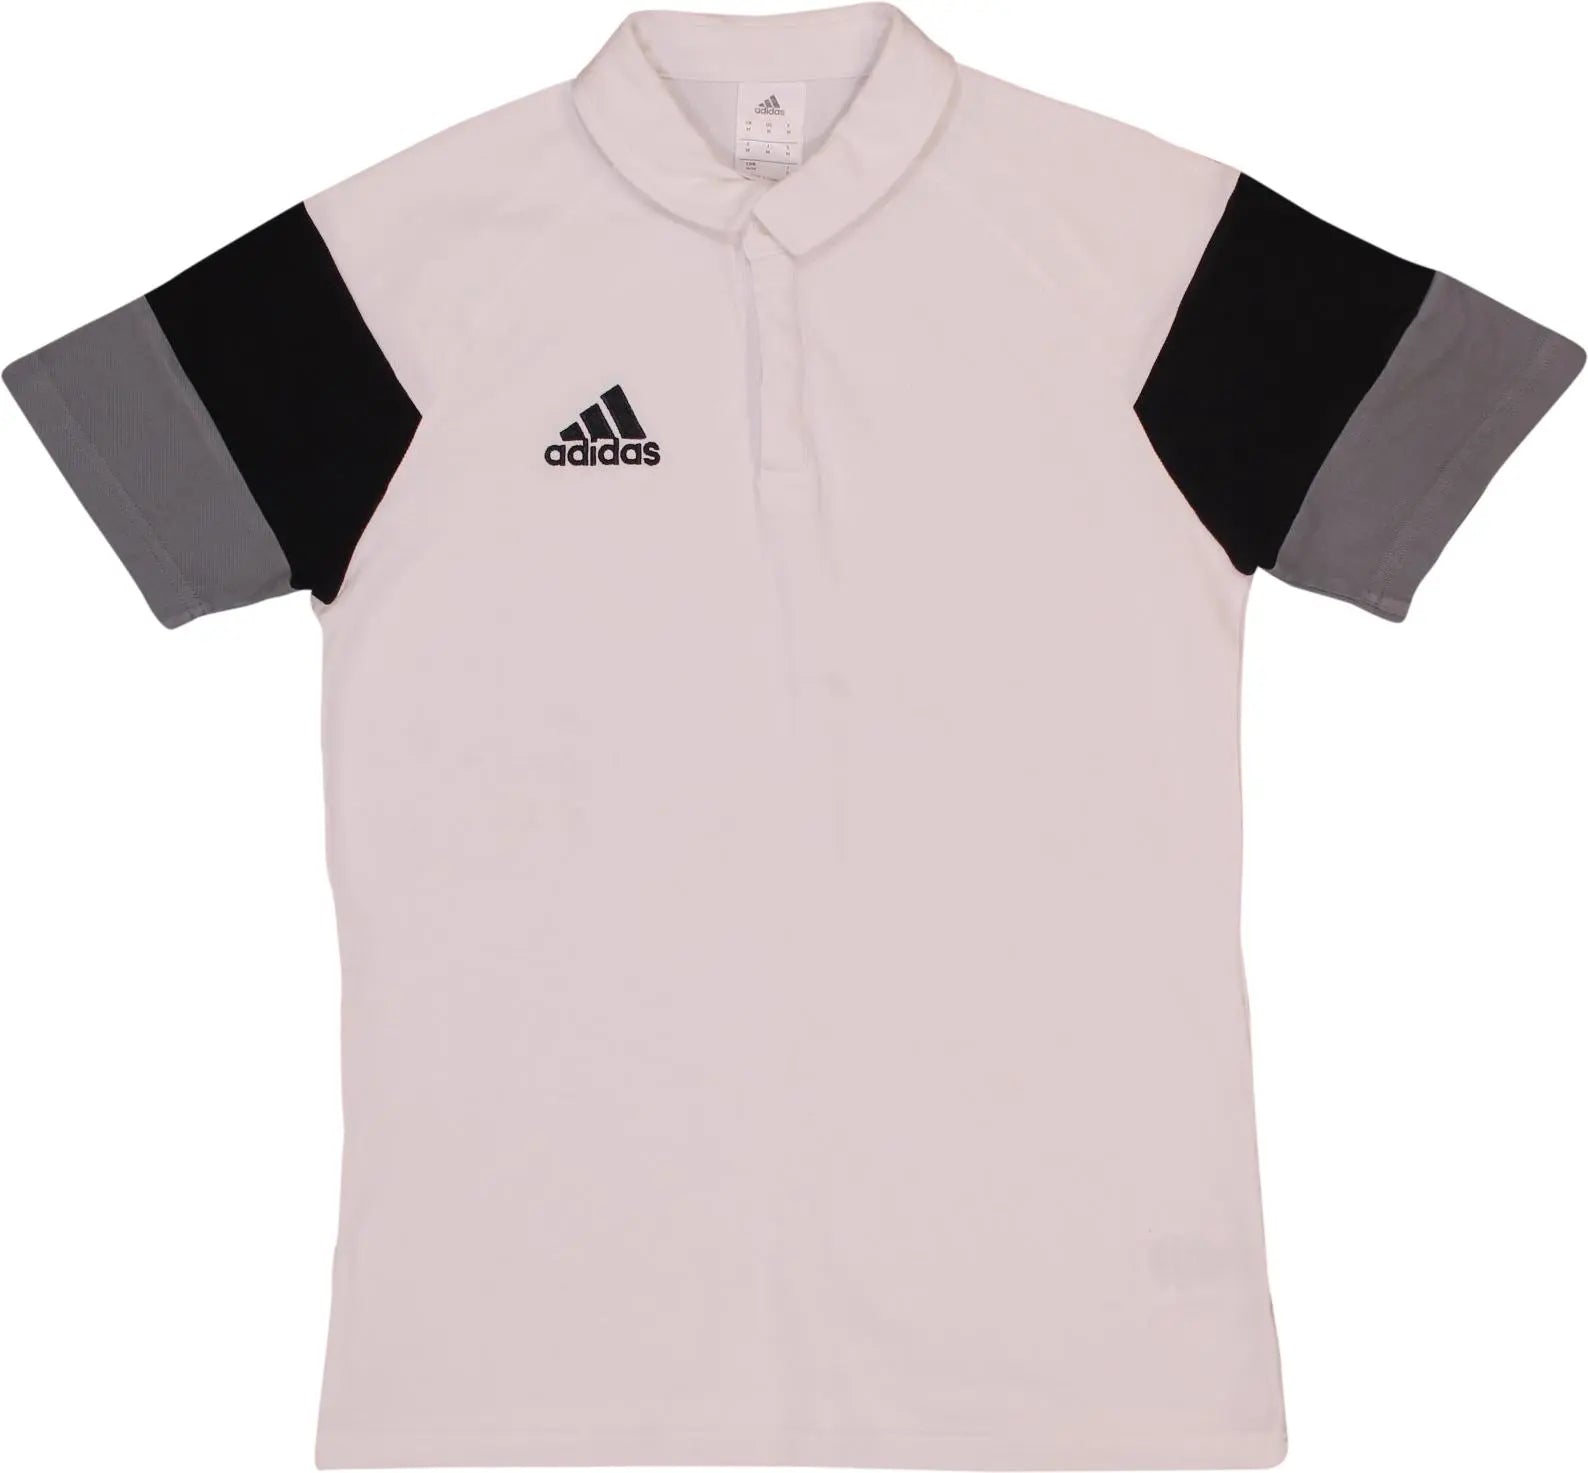 Adidas - Polo Shirt by Adidas- ThriftTale.com - Vintage and second handclothing